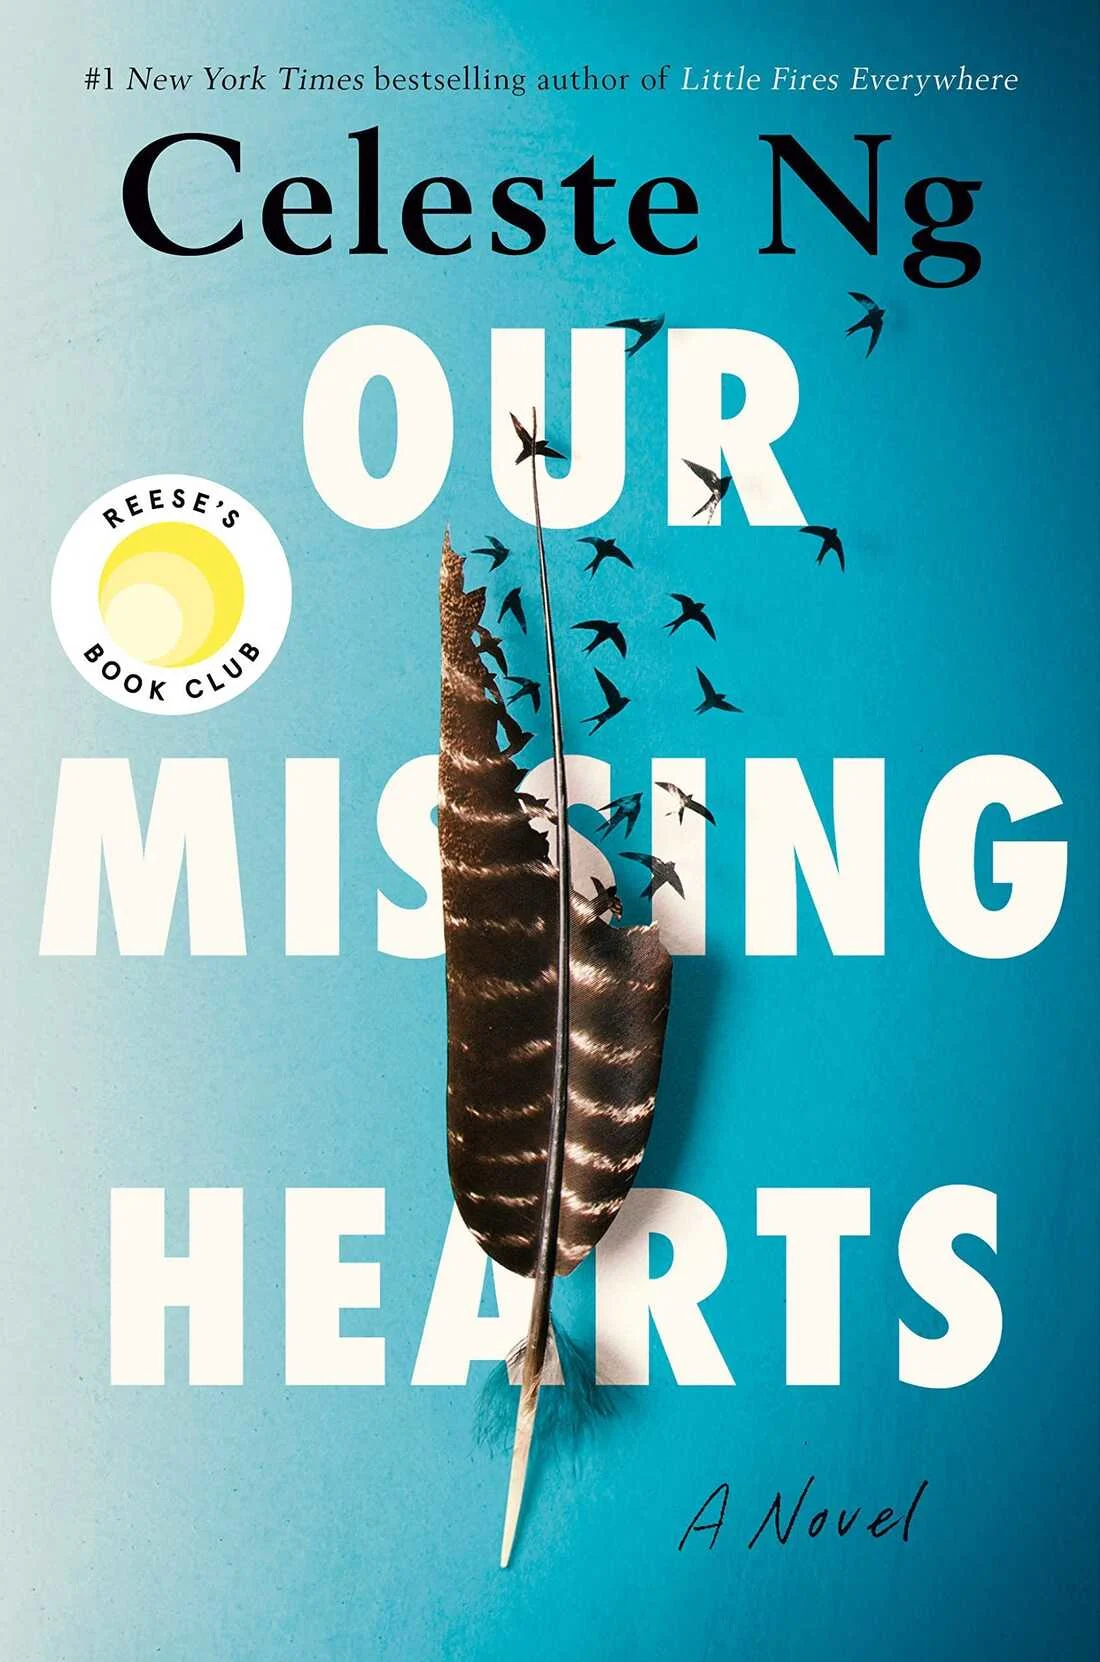 a feather melts into birds on a blue ombre background.  ugh reese witherspoon endorses this book for some reason